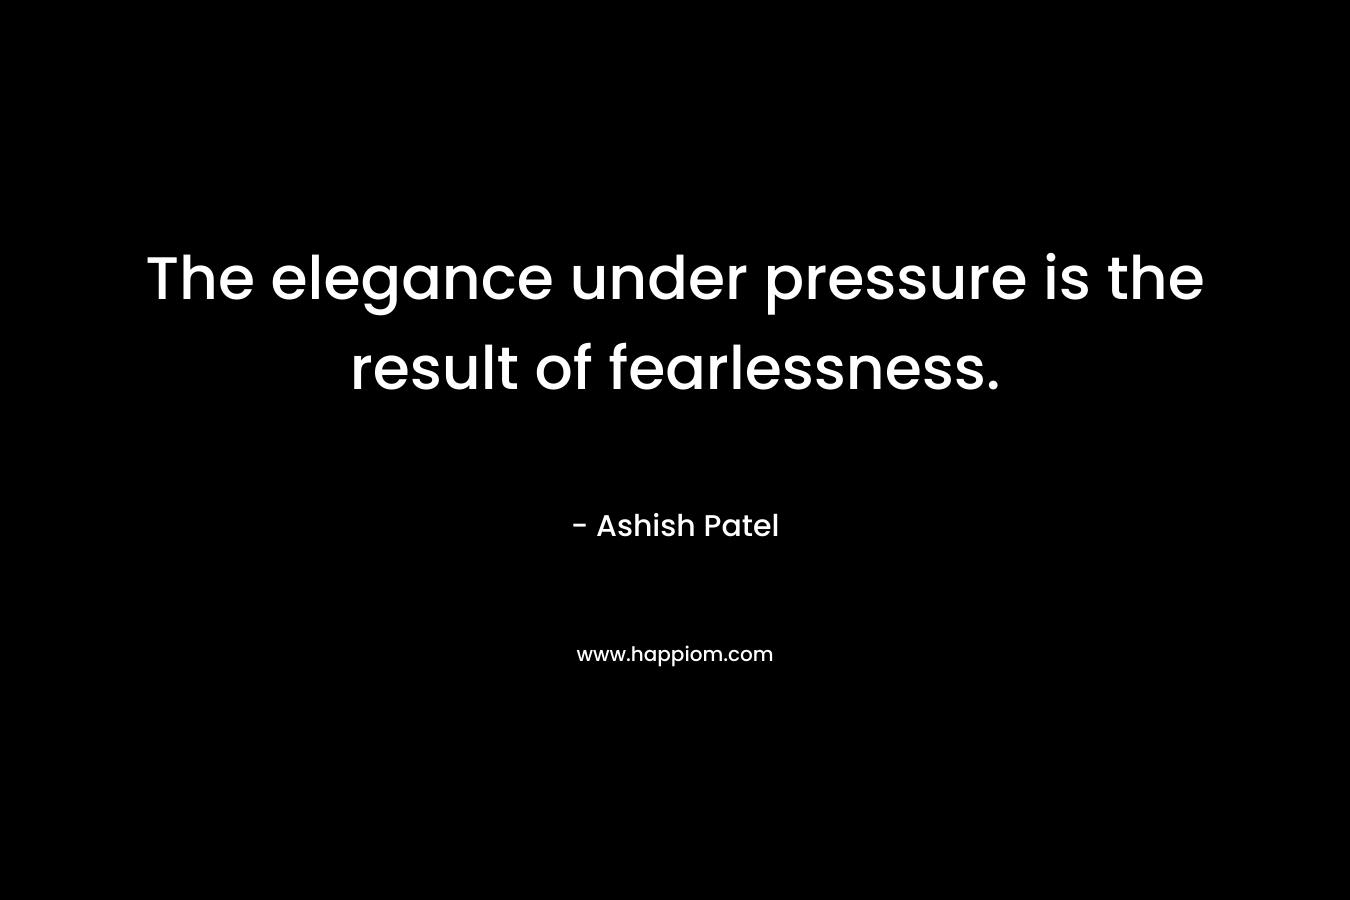 The elegance under pressure is the result of fearlessness.